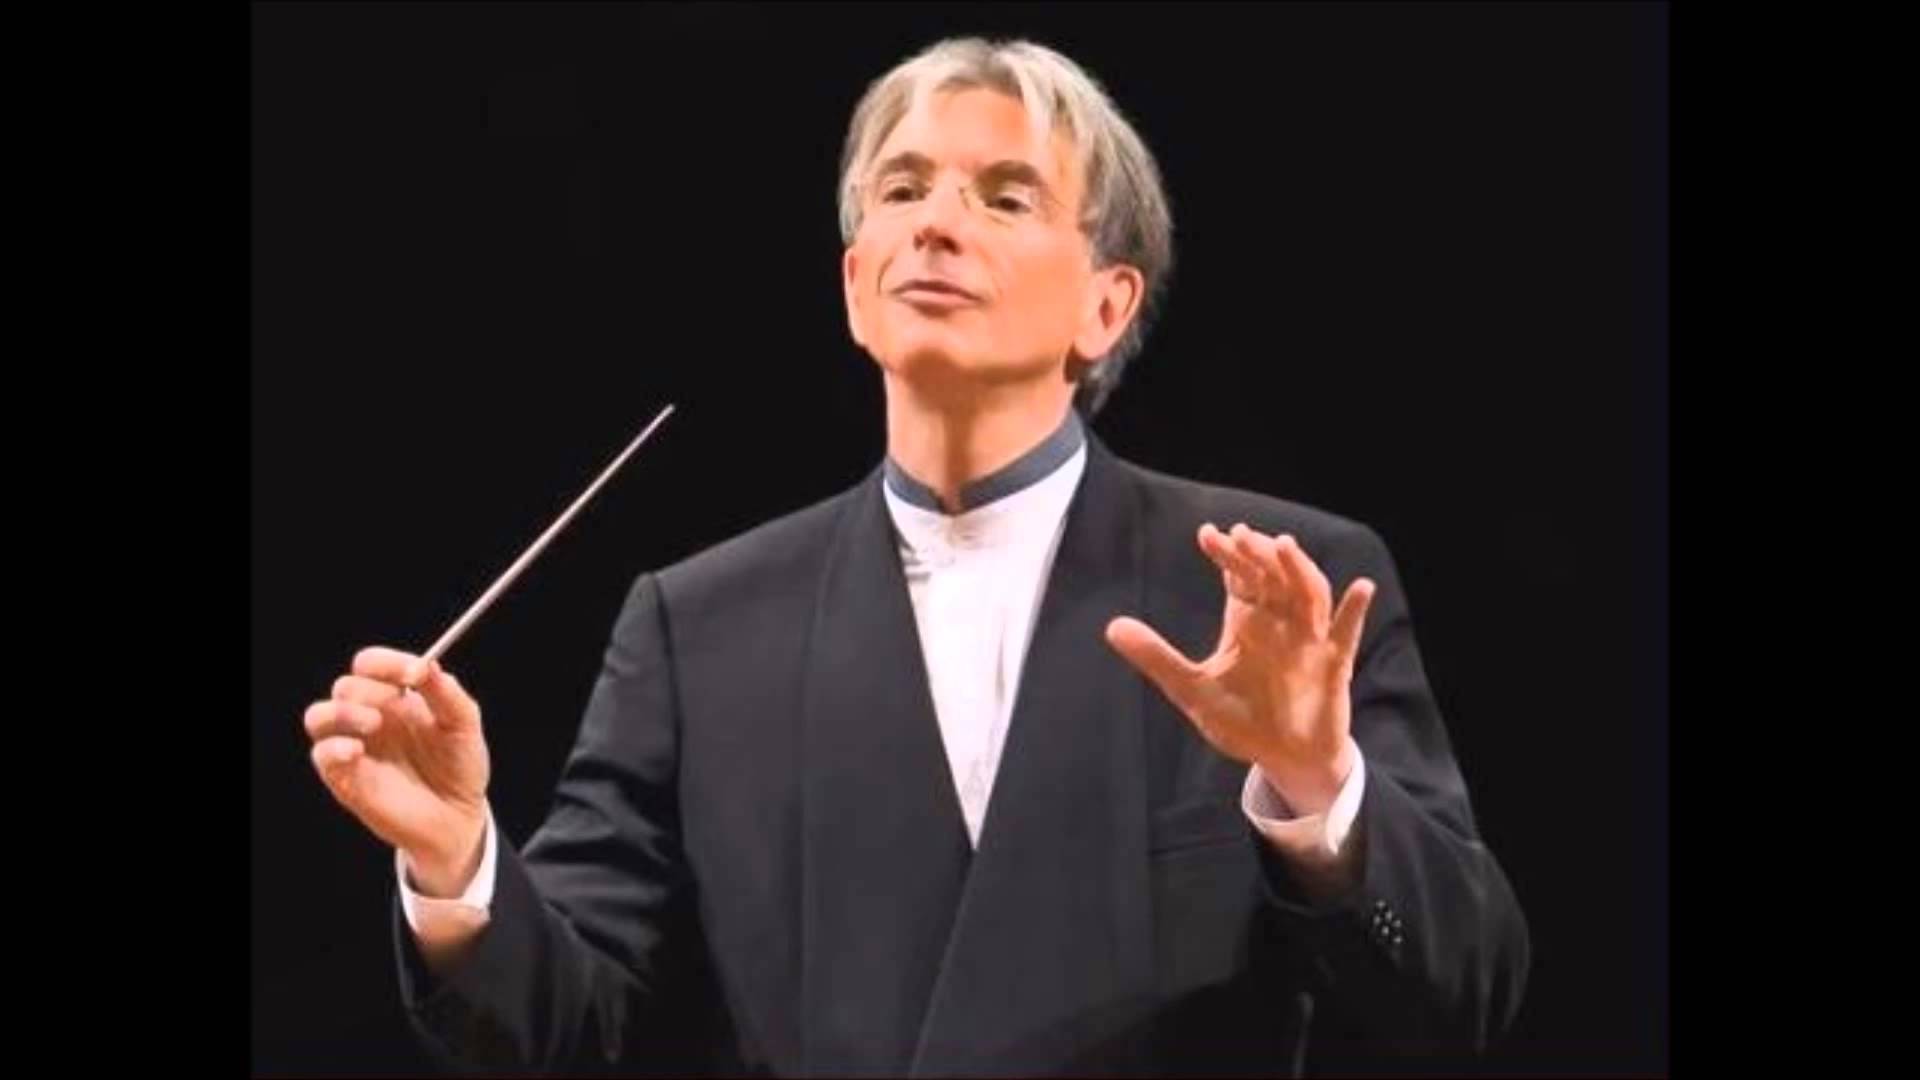 Michael Tilson Thomas is operated for a brain tumour